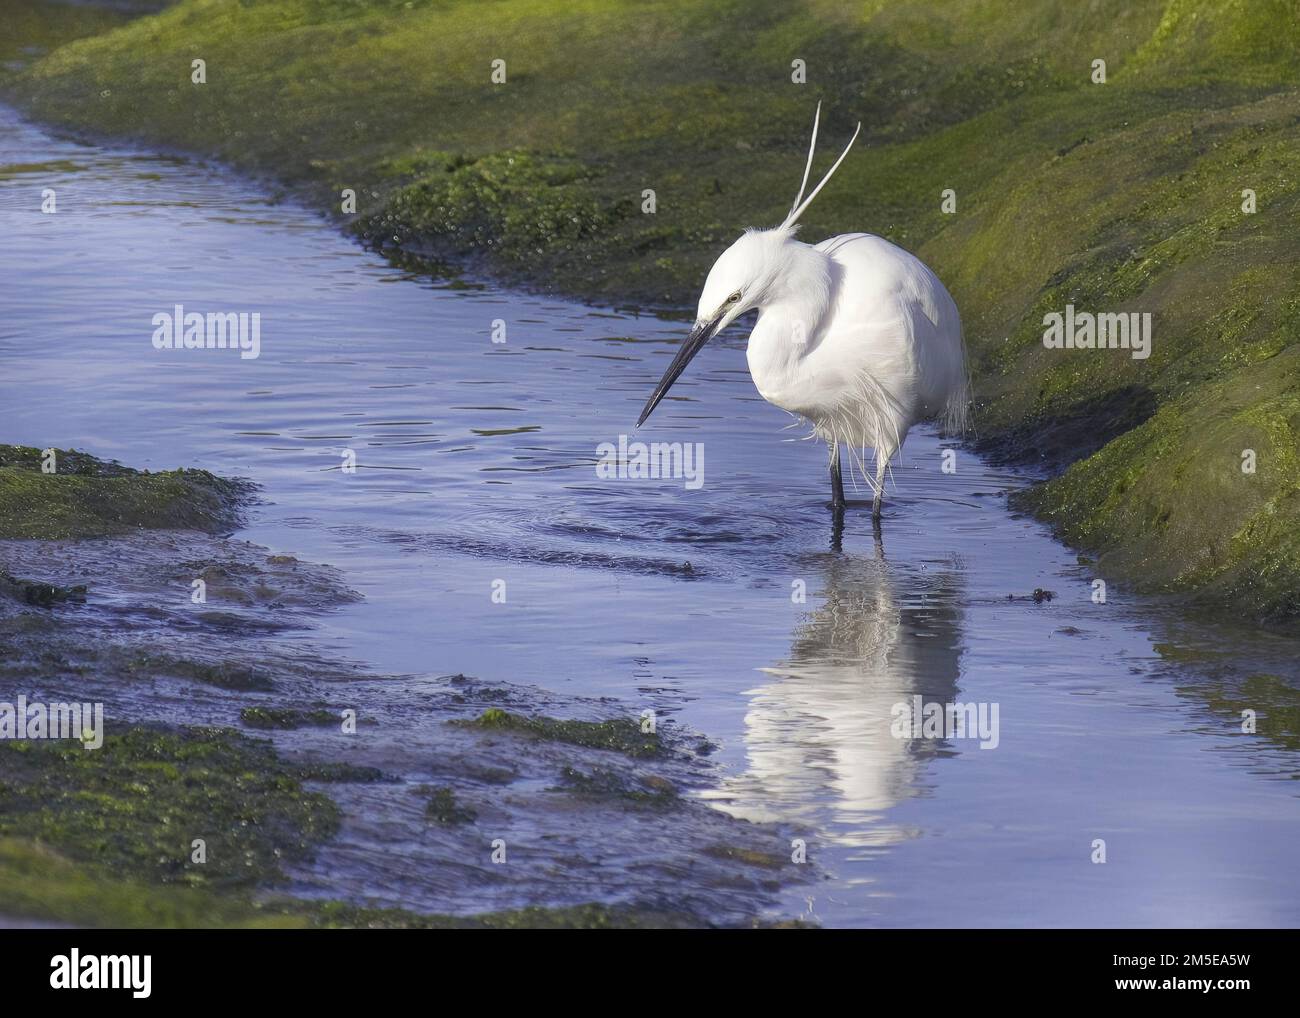 Little Egret all white feathers long black beak and with clear head plumes wades in blue water looking for fish with green seaweed on bank as backdrop Stock Photo